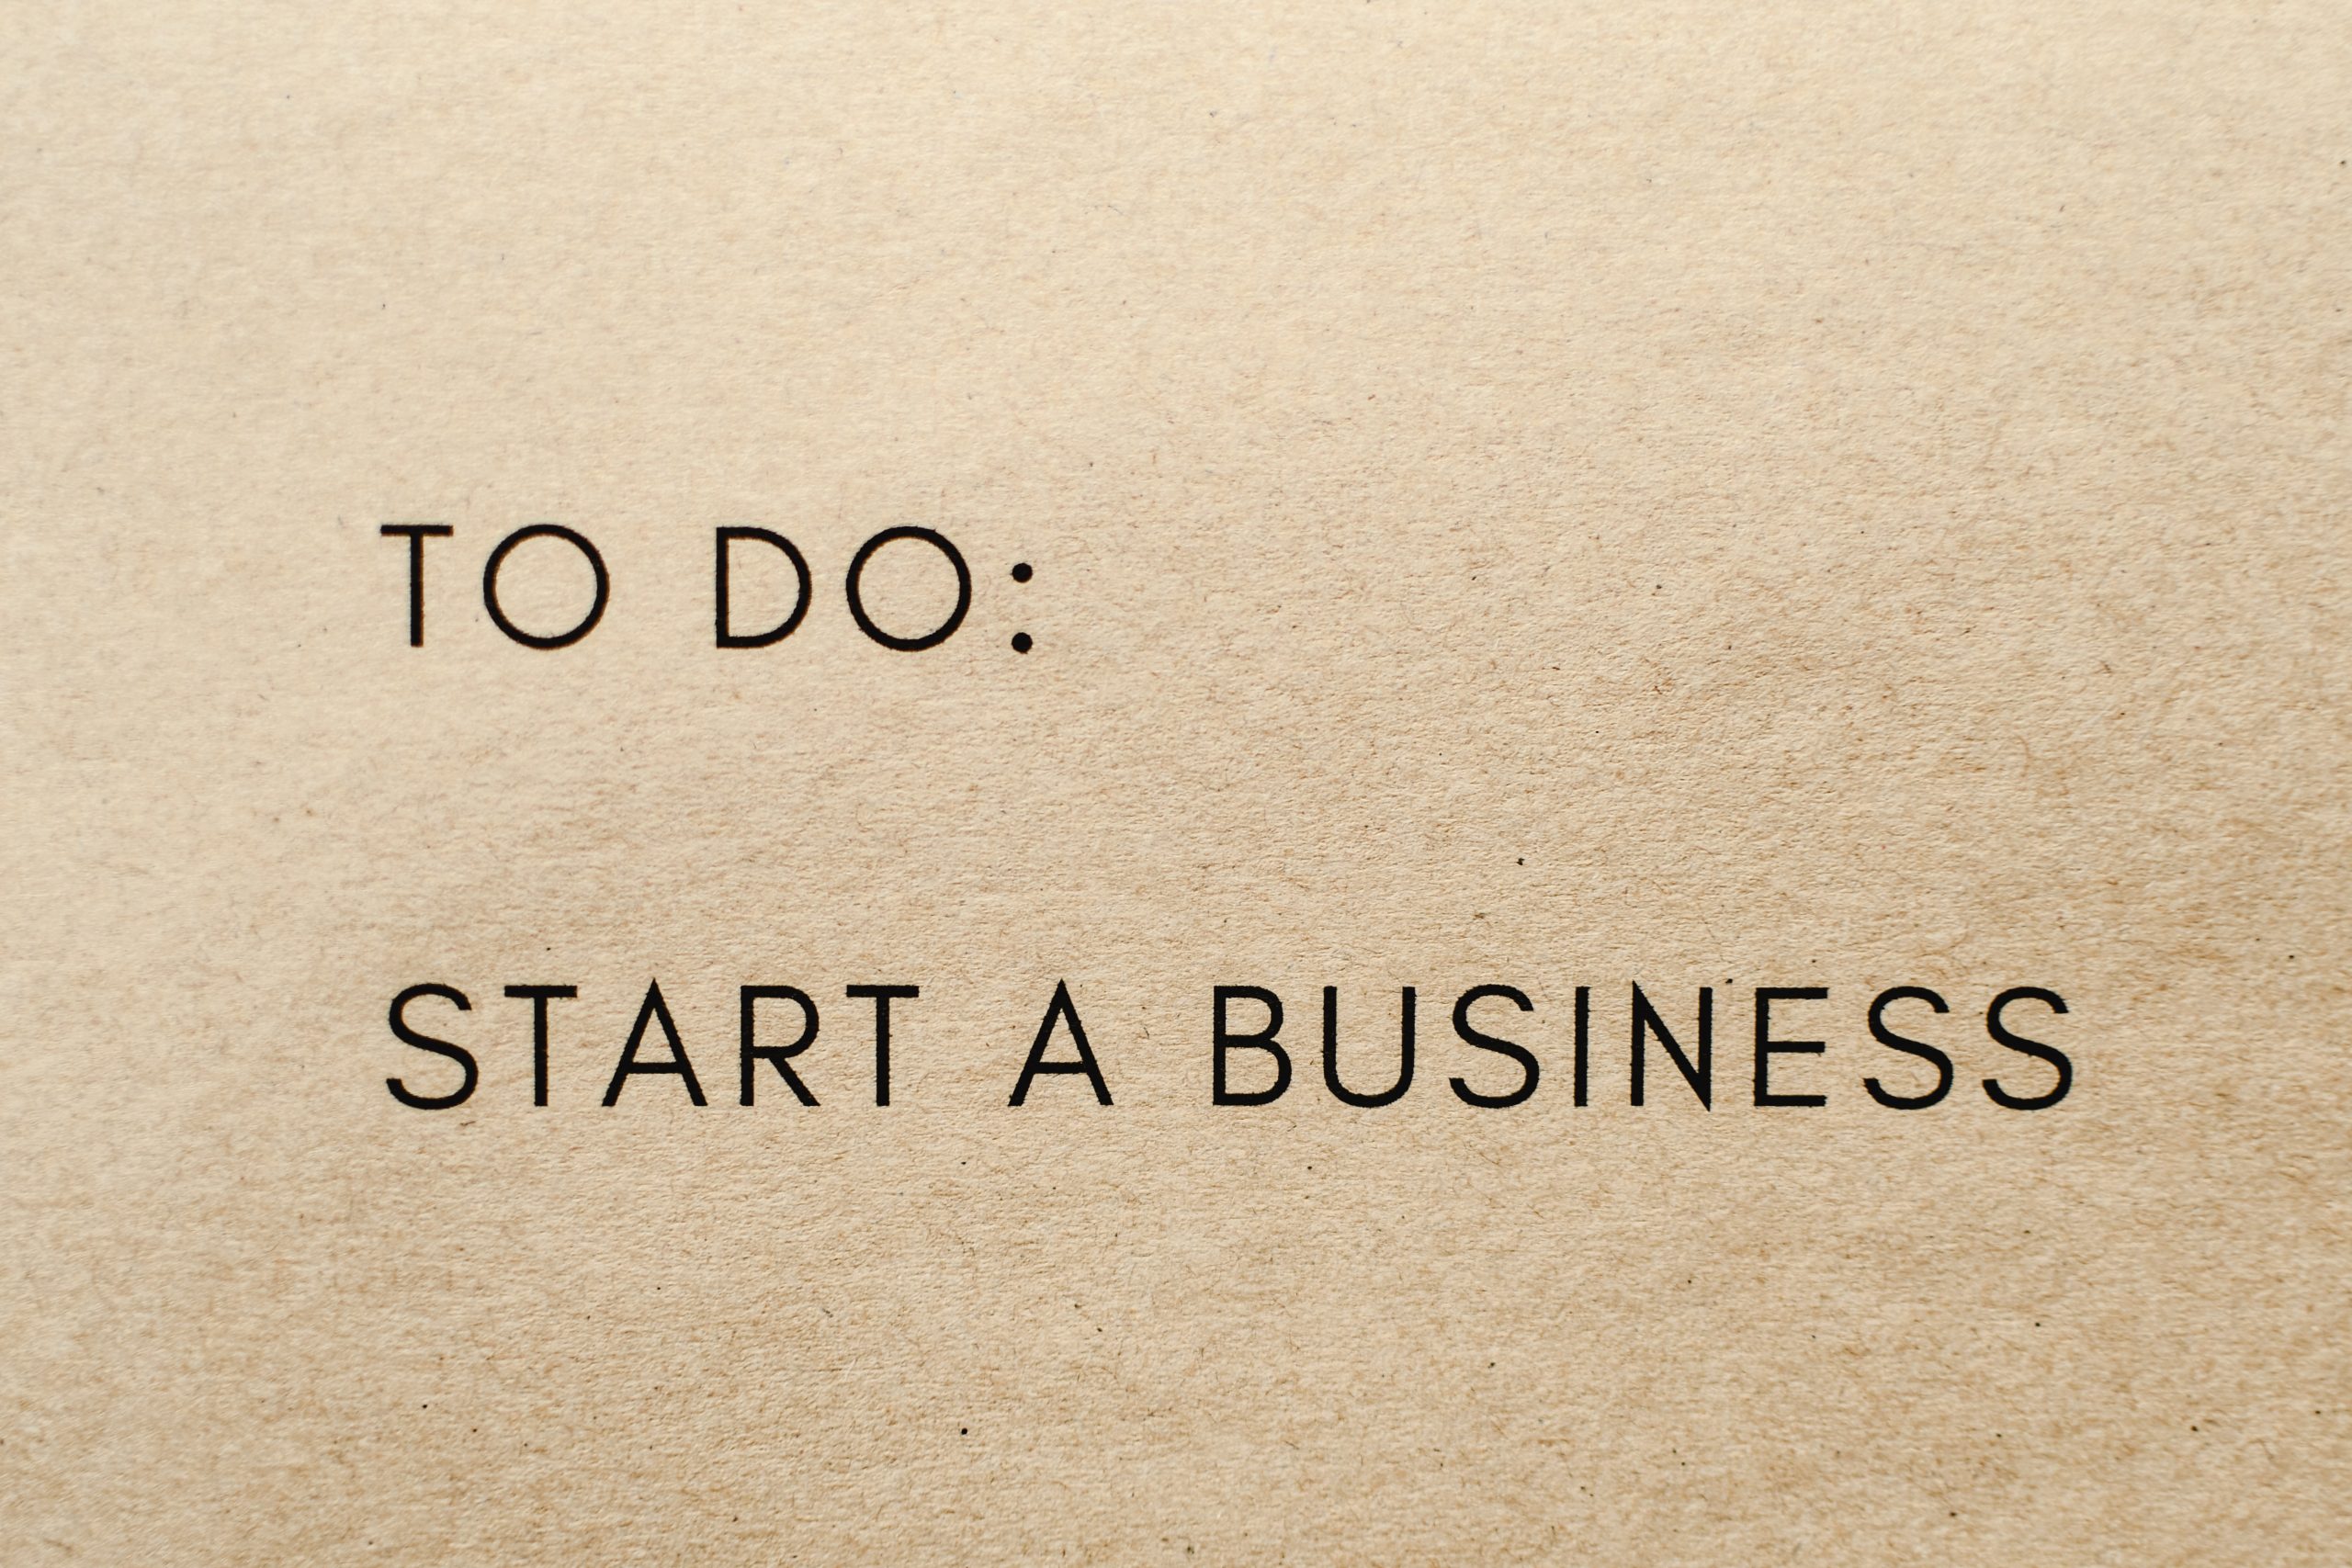 To do: start a business